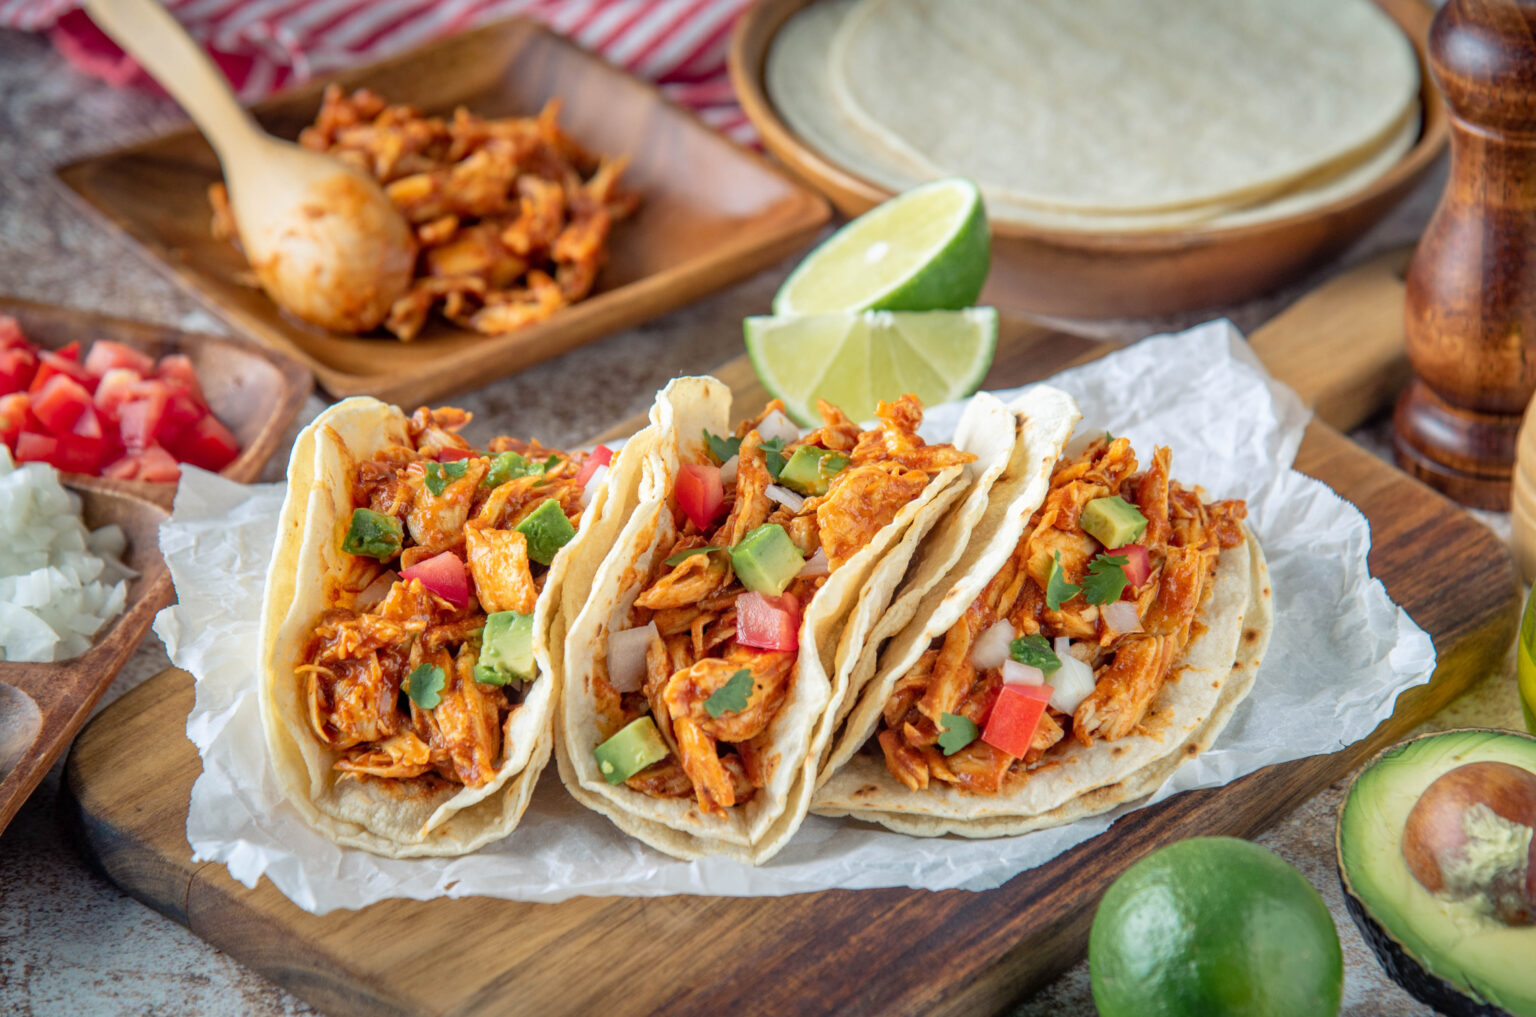 Taco Tuesday: Chili, Cilantro & Lime Chicken - Women of Today